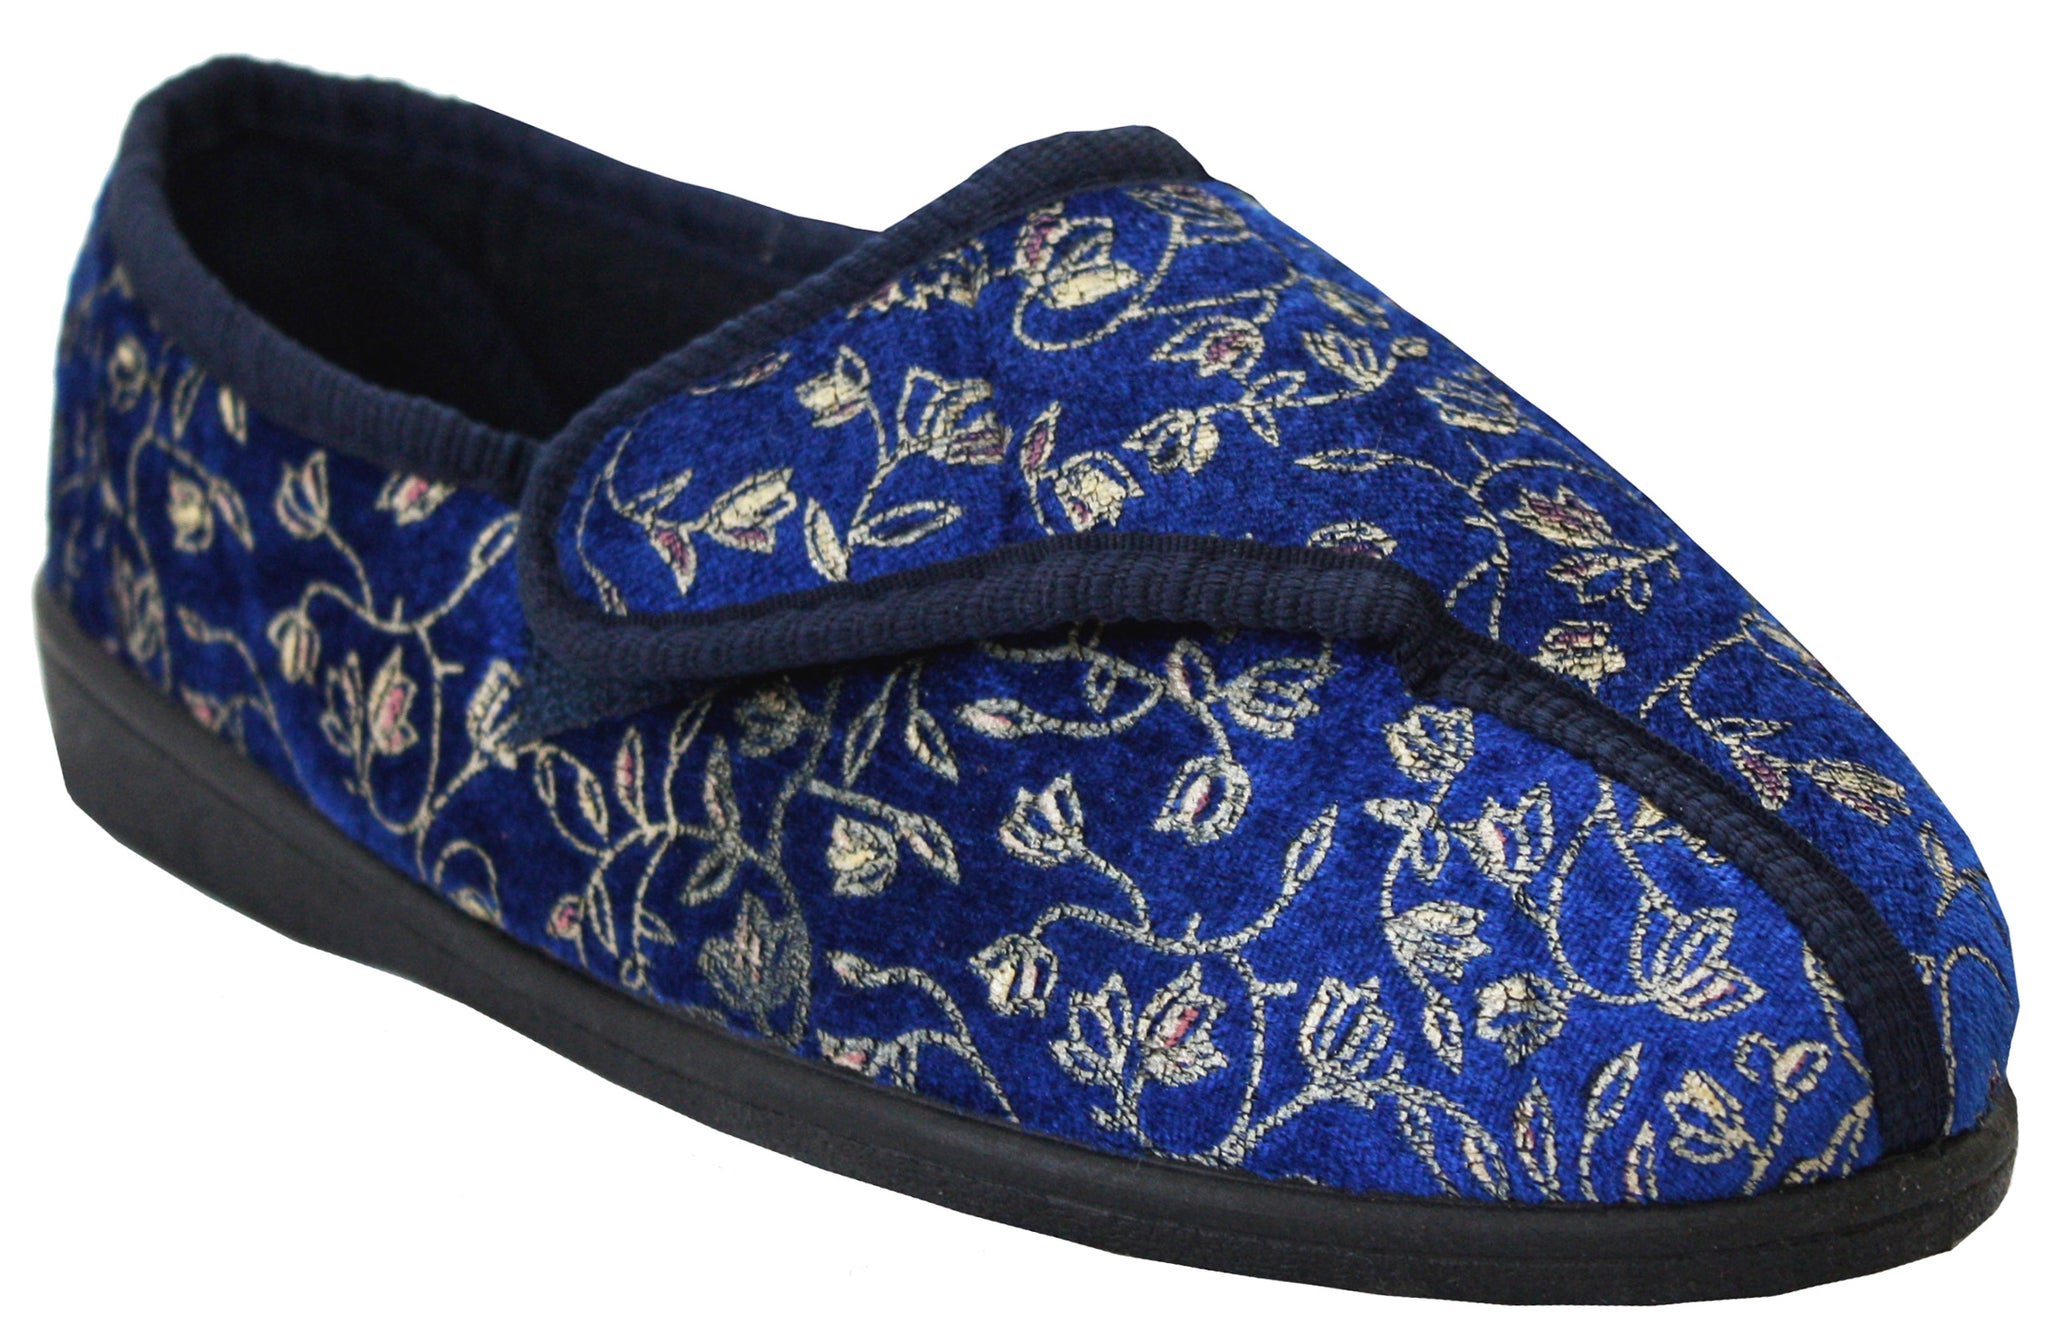 Womens Navy Diabetic Orthopaedic Touch Fastening Slippers